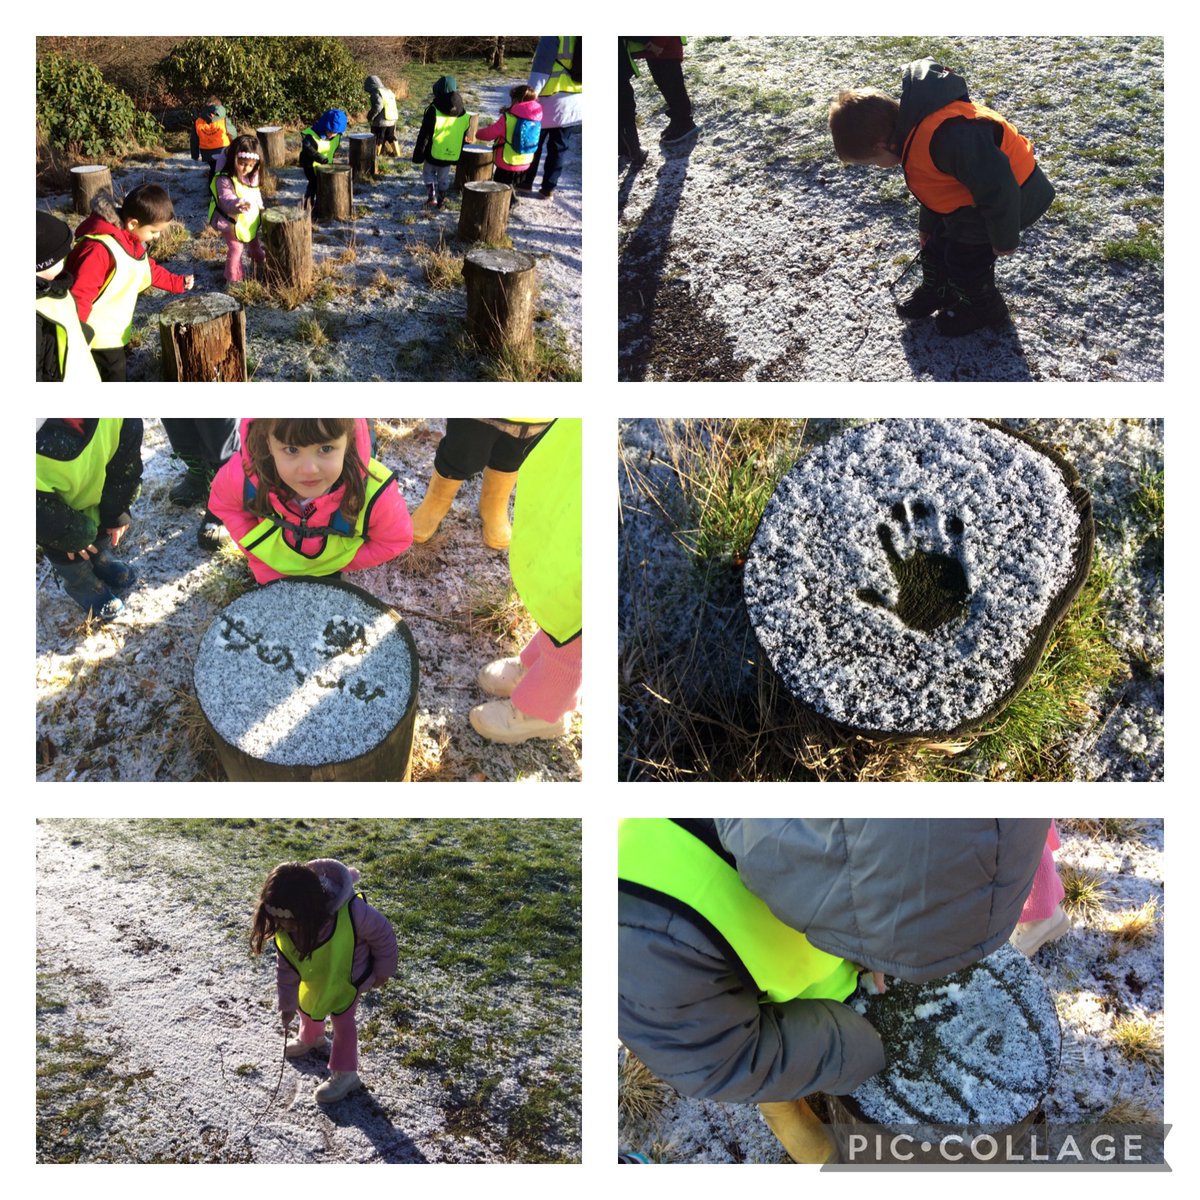 Mark making in the snow ❄️ #achievingalice #literacyoutdoors